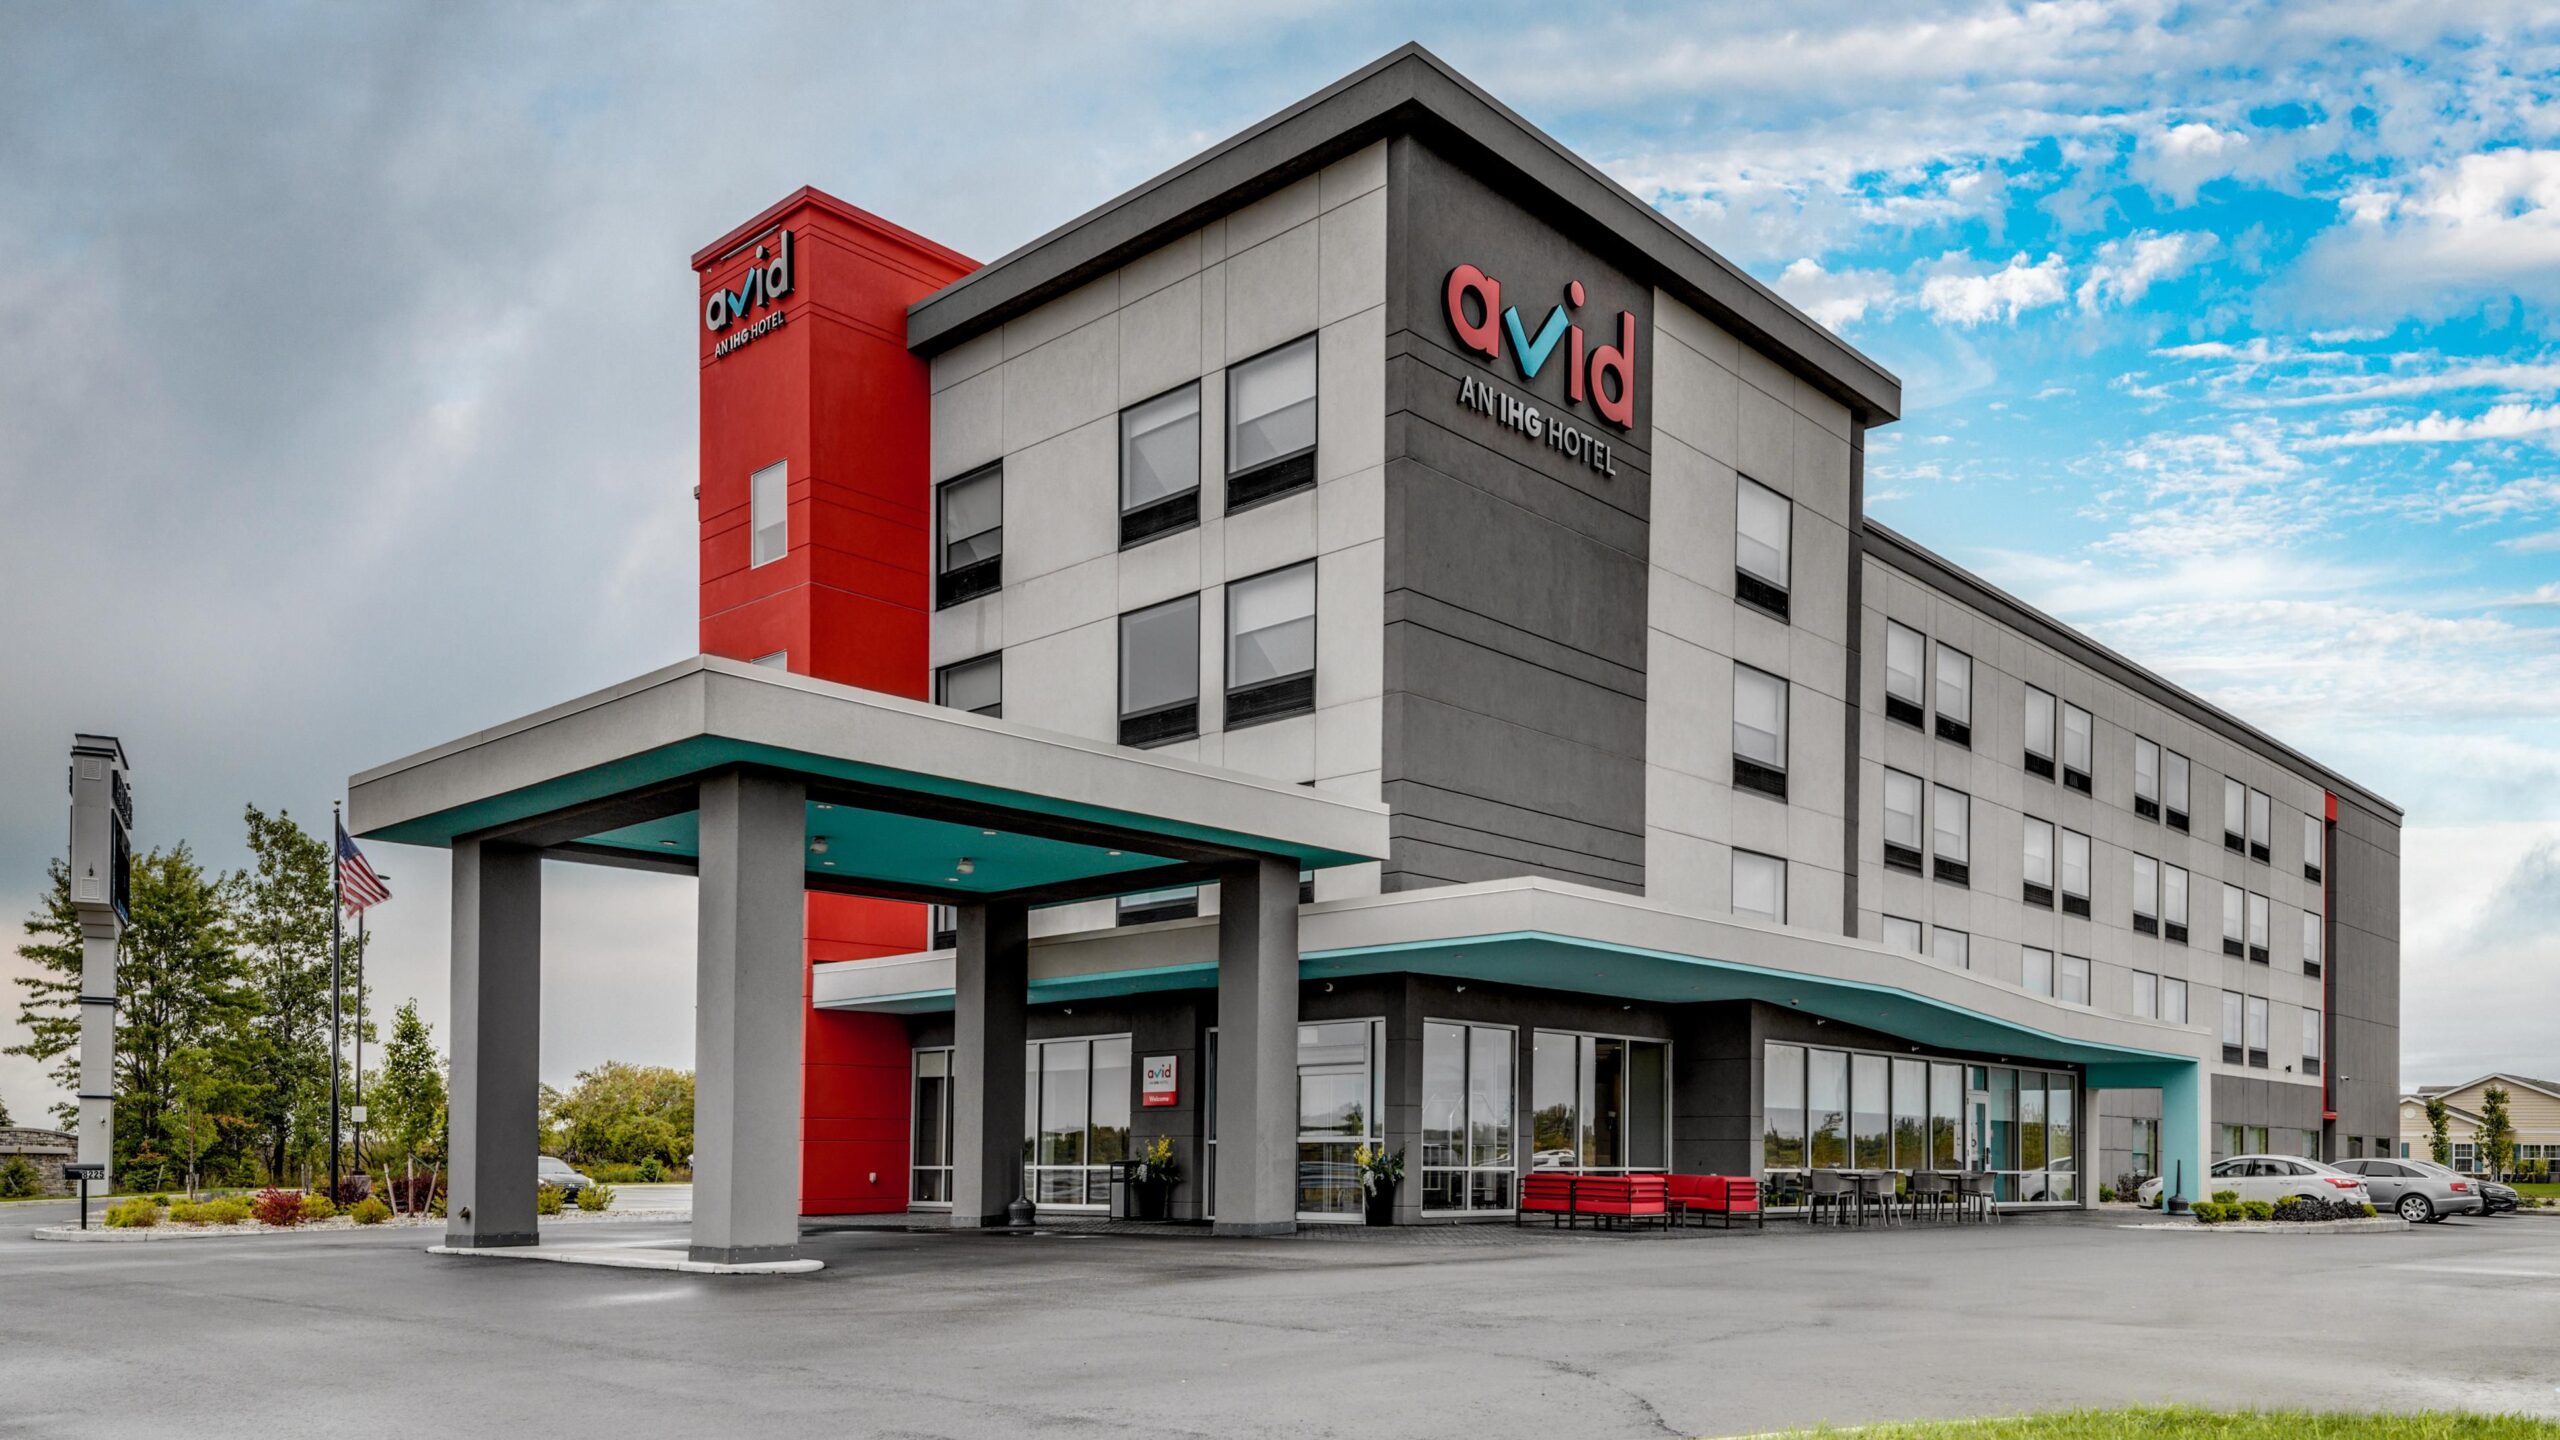 6PM partners with ACRE Holdings to purchase Avid Hotel in Zeeland